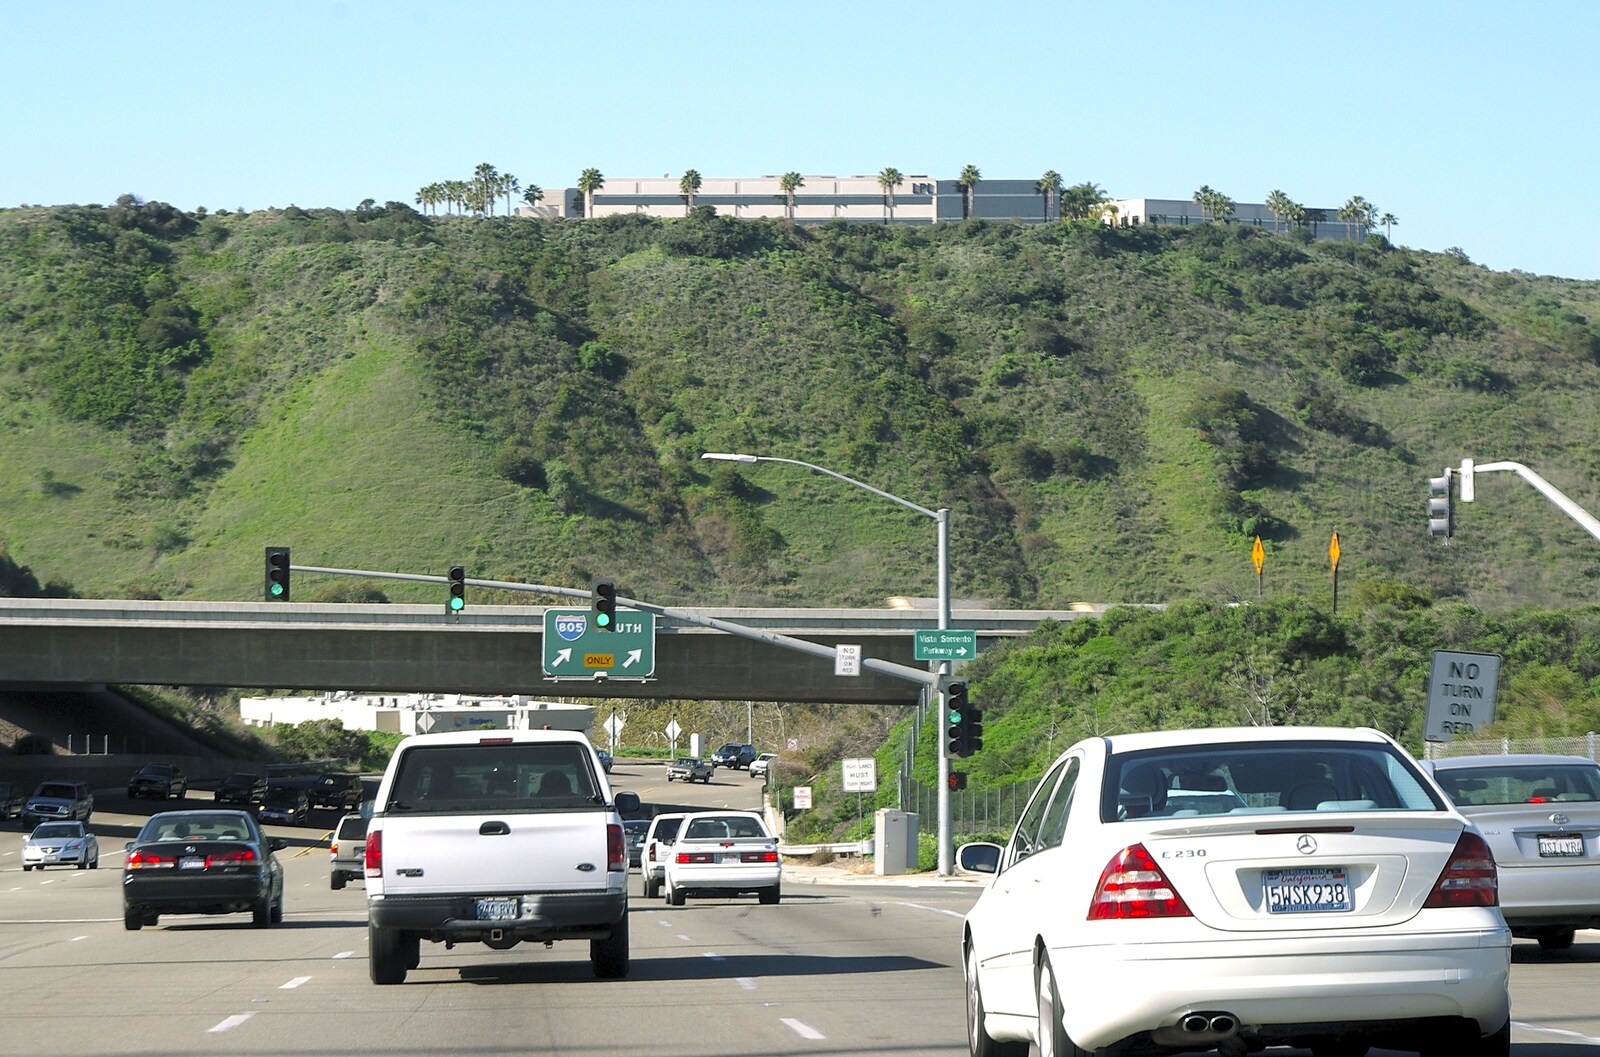 San Diego and Hollywood, California, US - 3rd March 2008: On the freeway near the I-805 turn off